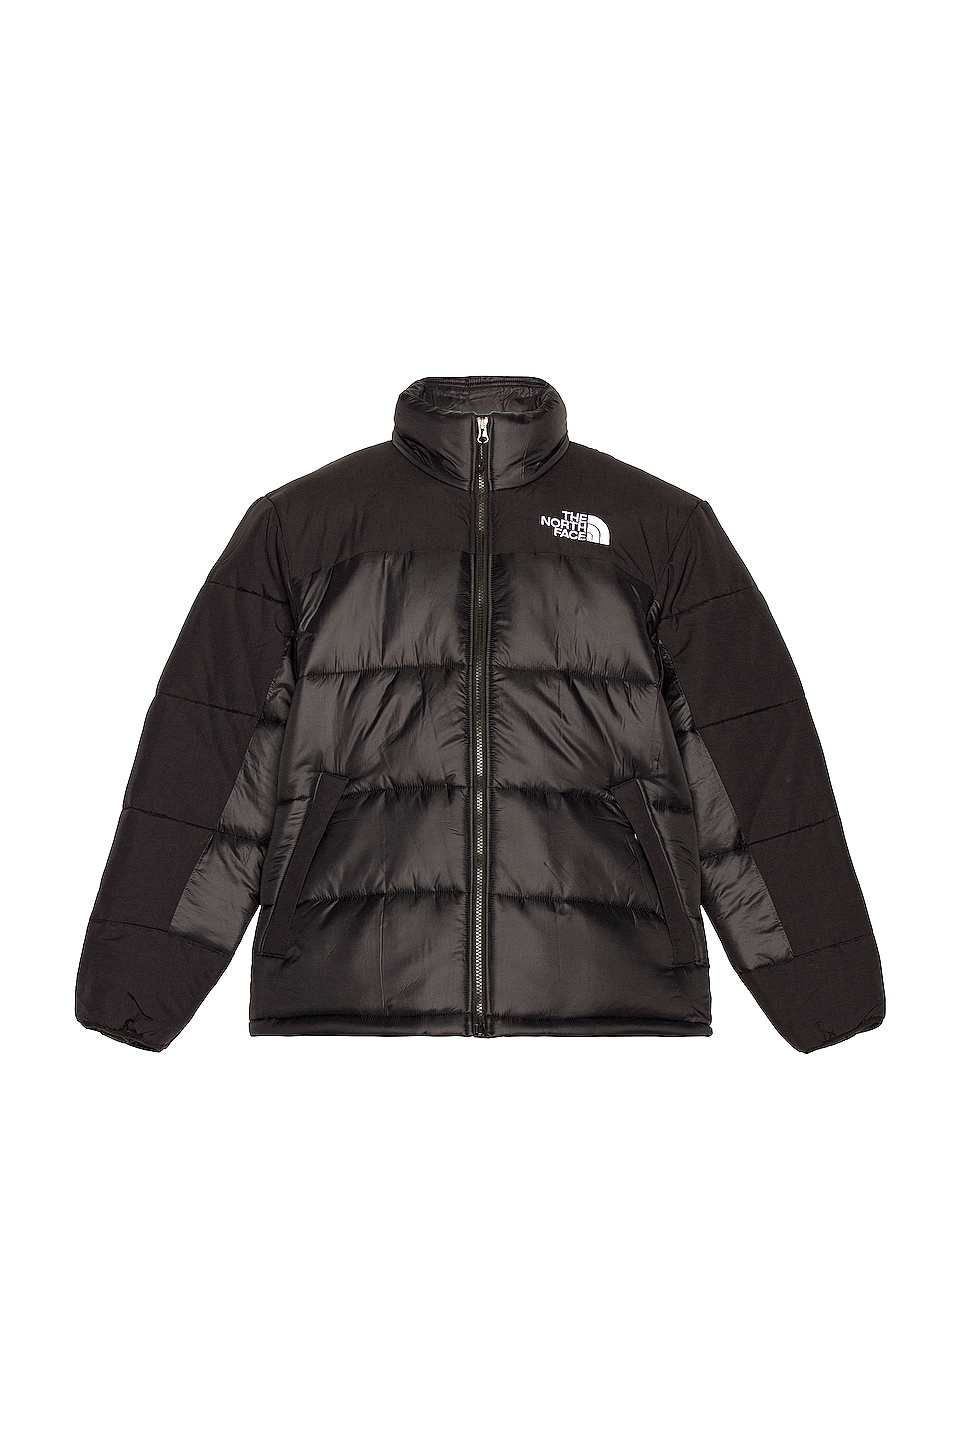 The North Face HMLYN Insulated Jacket 